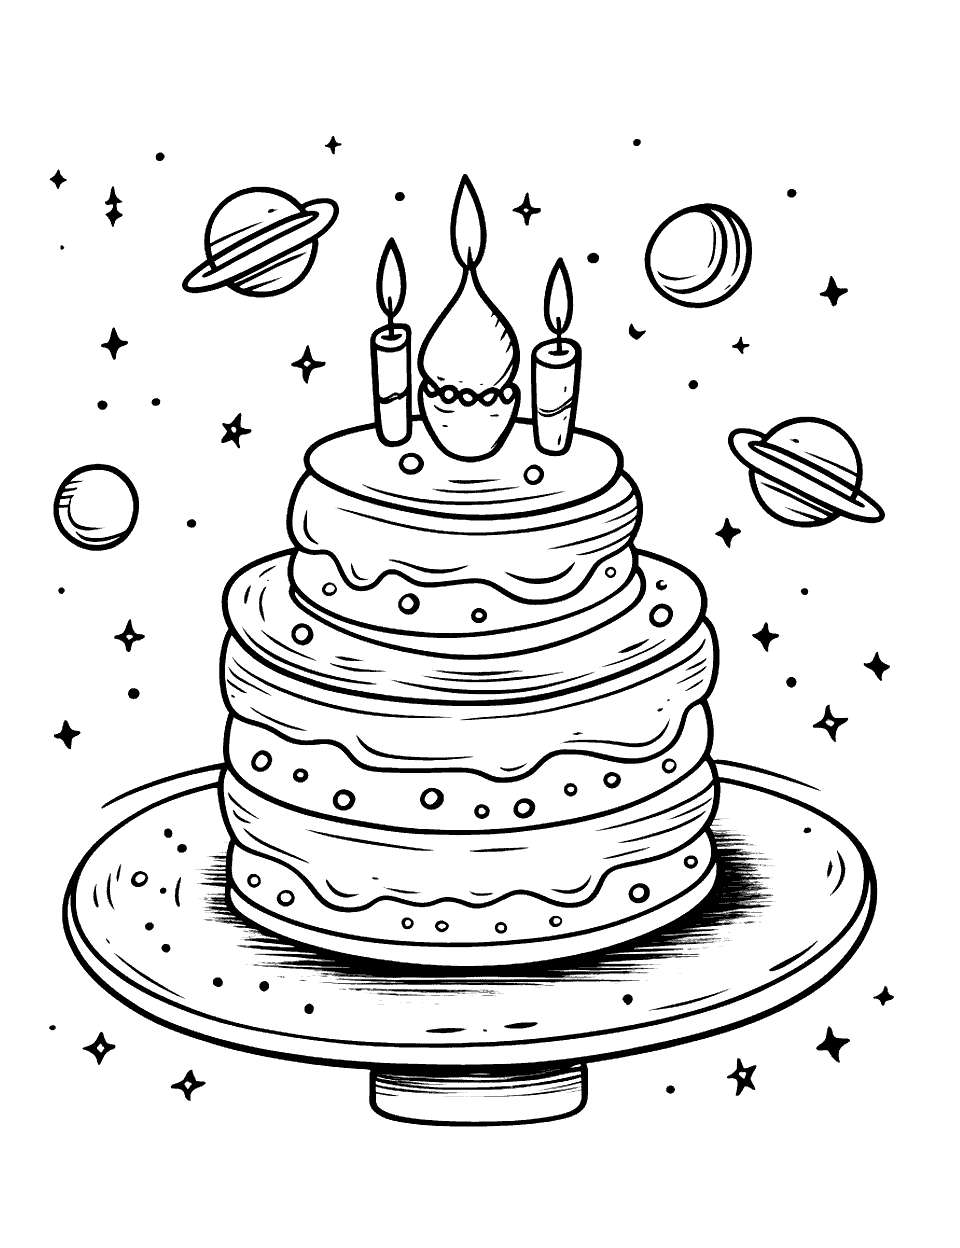 Deep Space Exploration Cake Coloring Page - A cake with planets and stars.